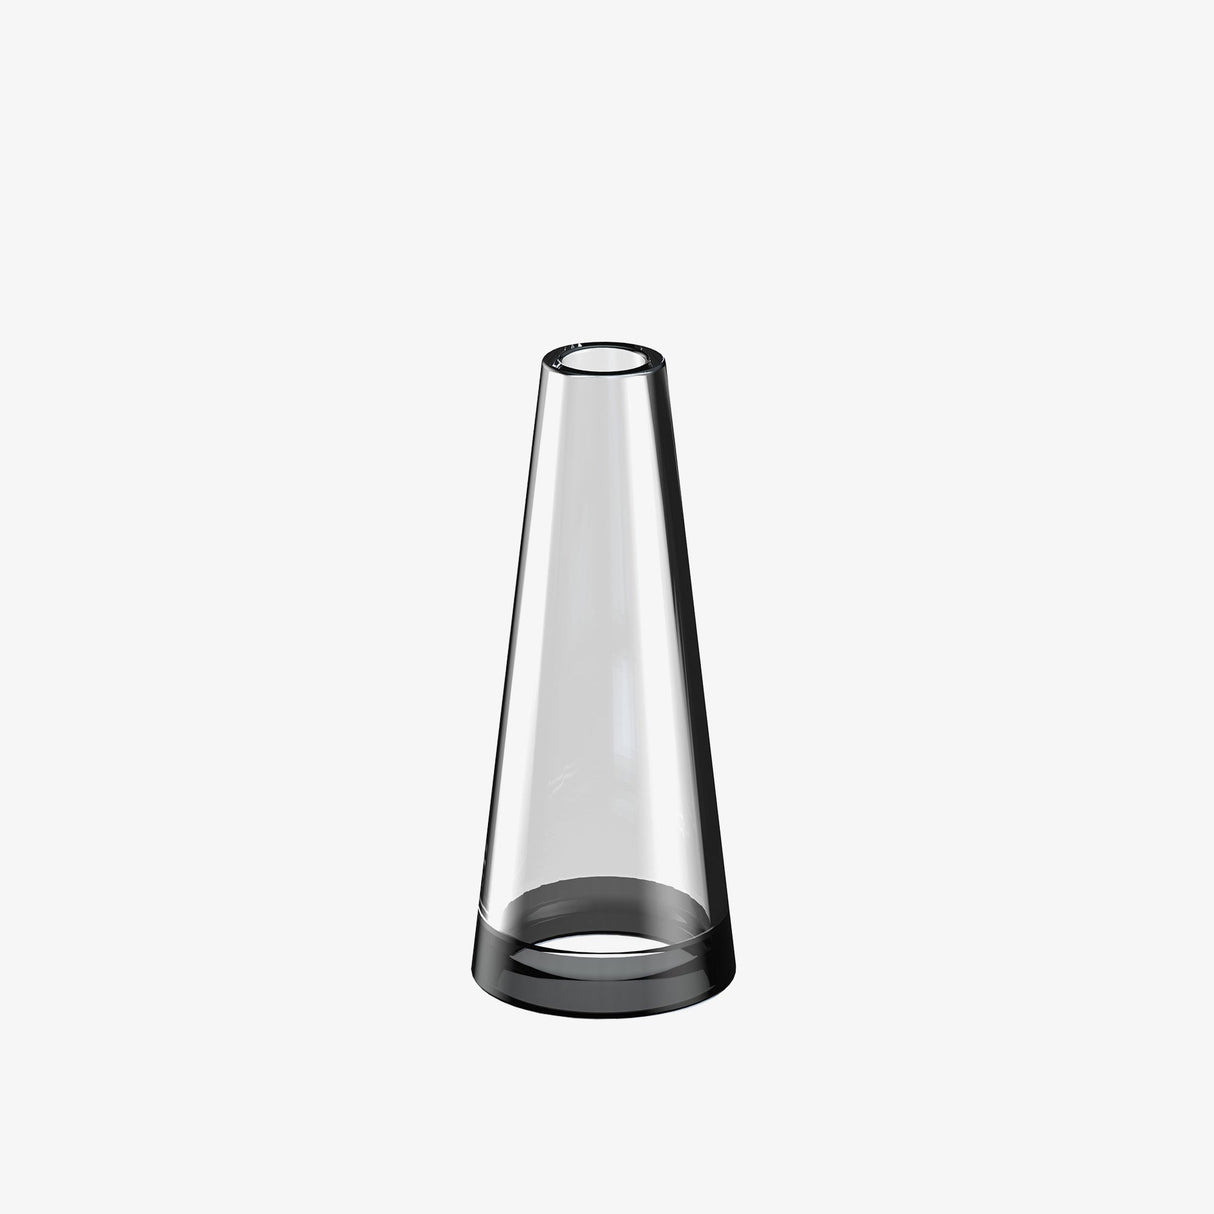 SoftGlass Handcrafted Cone Top for Totem - Durable & Aesthetic